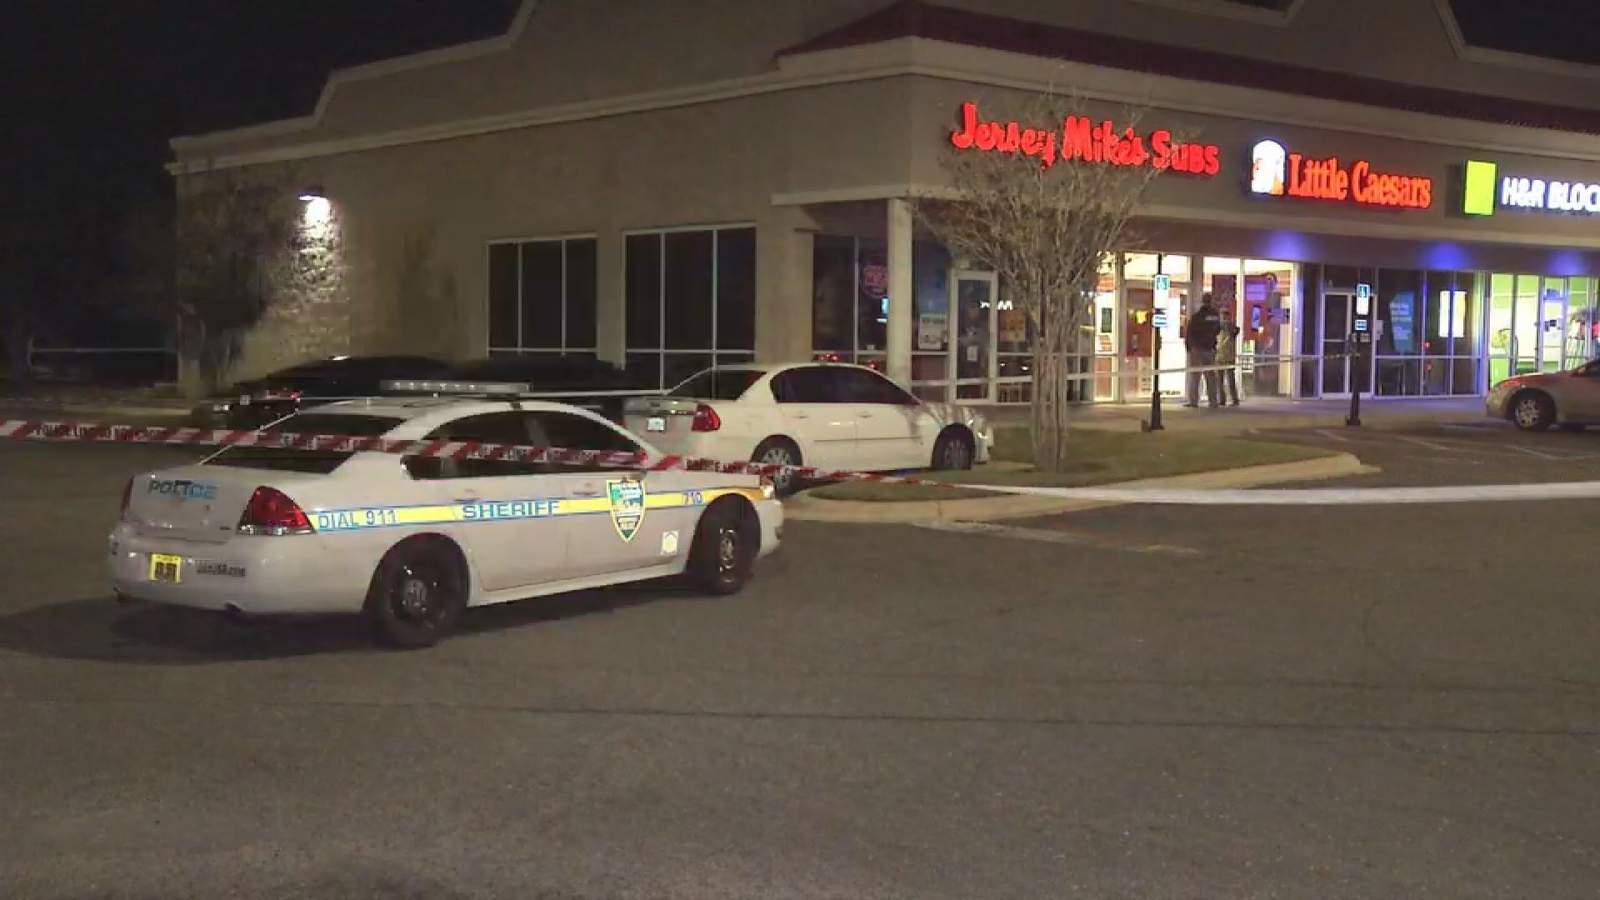 Man arrested after armed robbery at Little Caesars